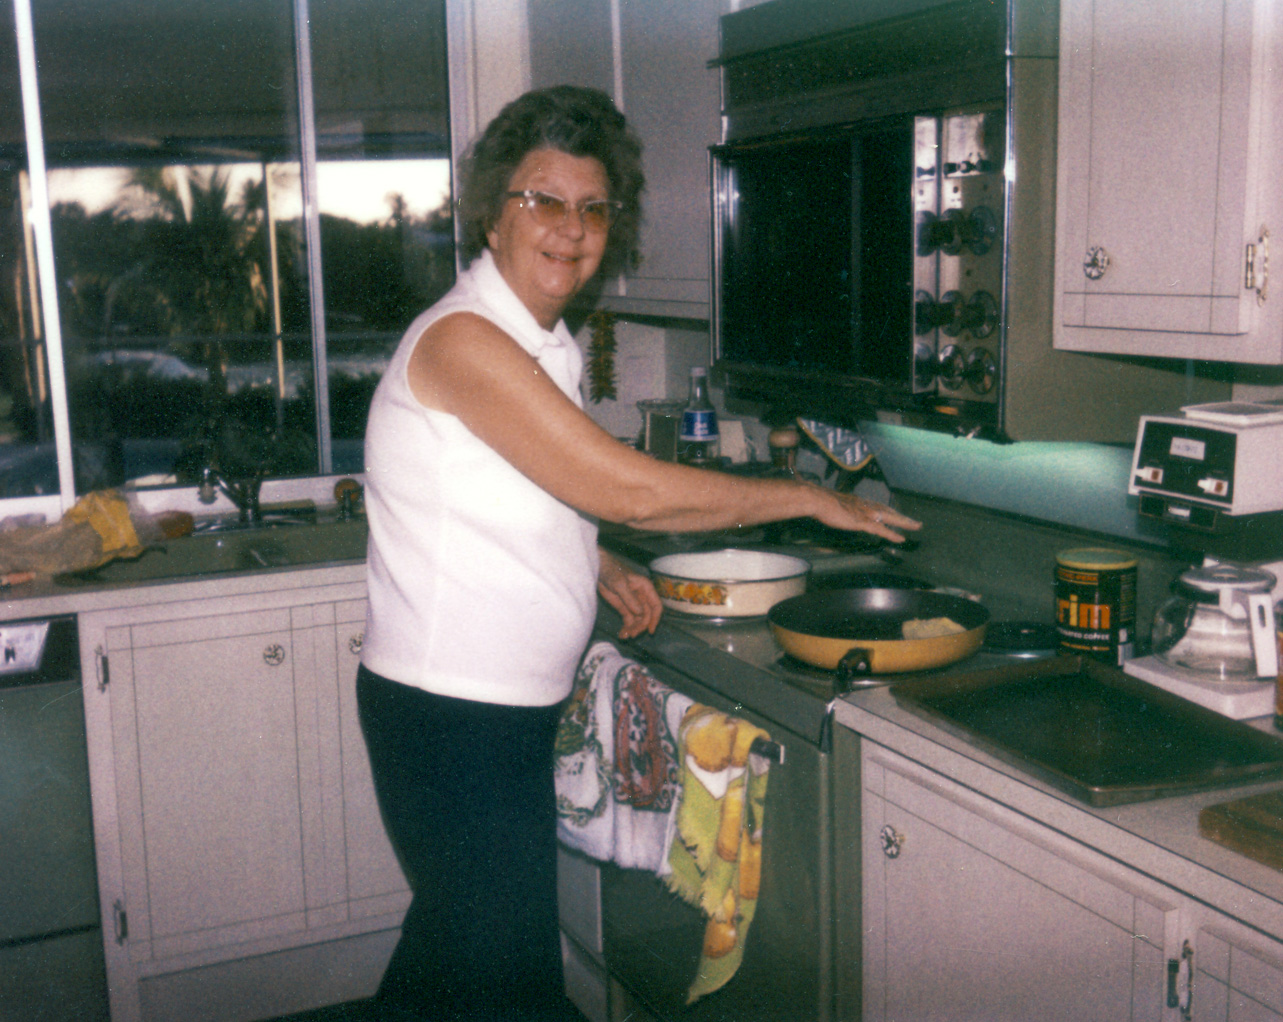 Here is my mother in her retirement home kitchen in Naples, Florida circa 1979. She always loved to cook the fish my dad caught in the gulf. If there was more fresh fish than they could eat, she froze them in a coffee can for later meals. Looks like Brim this week. Dad's boat can be seen through the kitchen window. View full size.